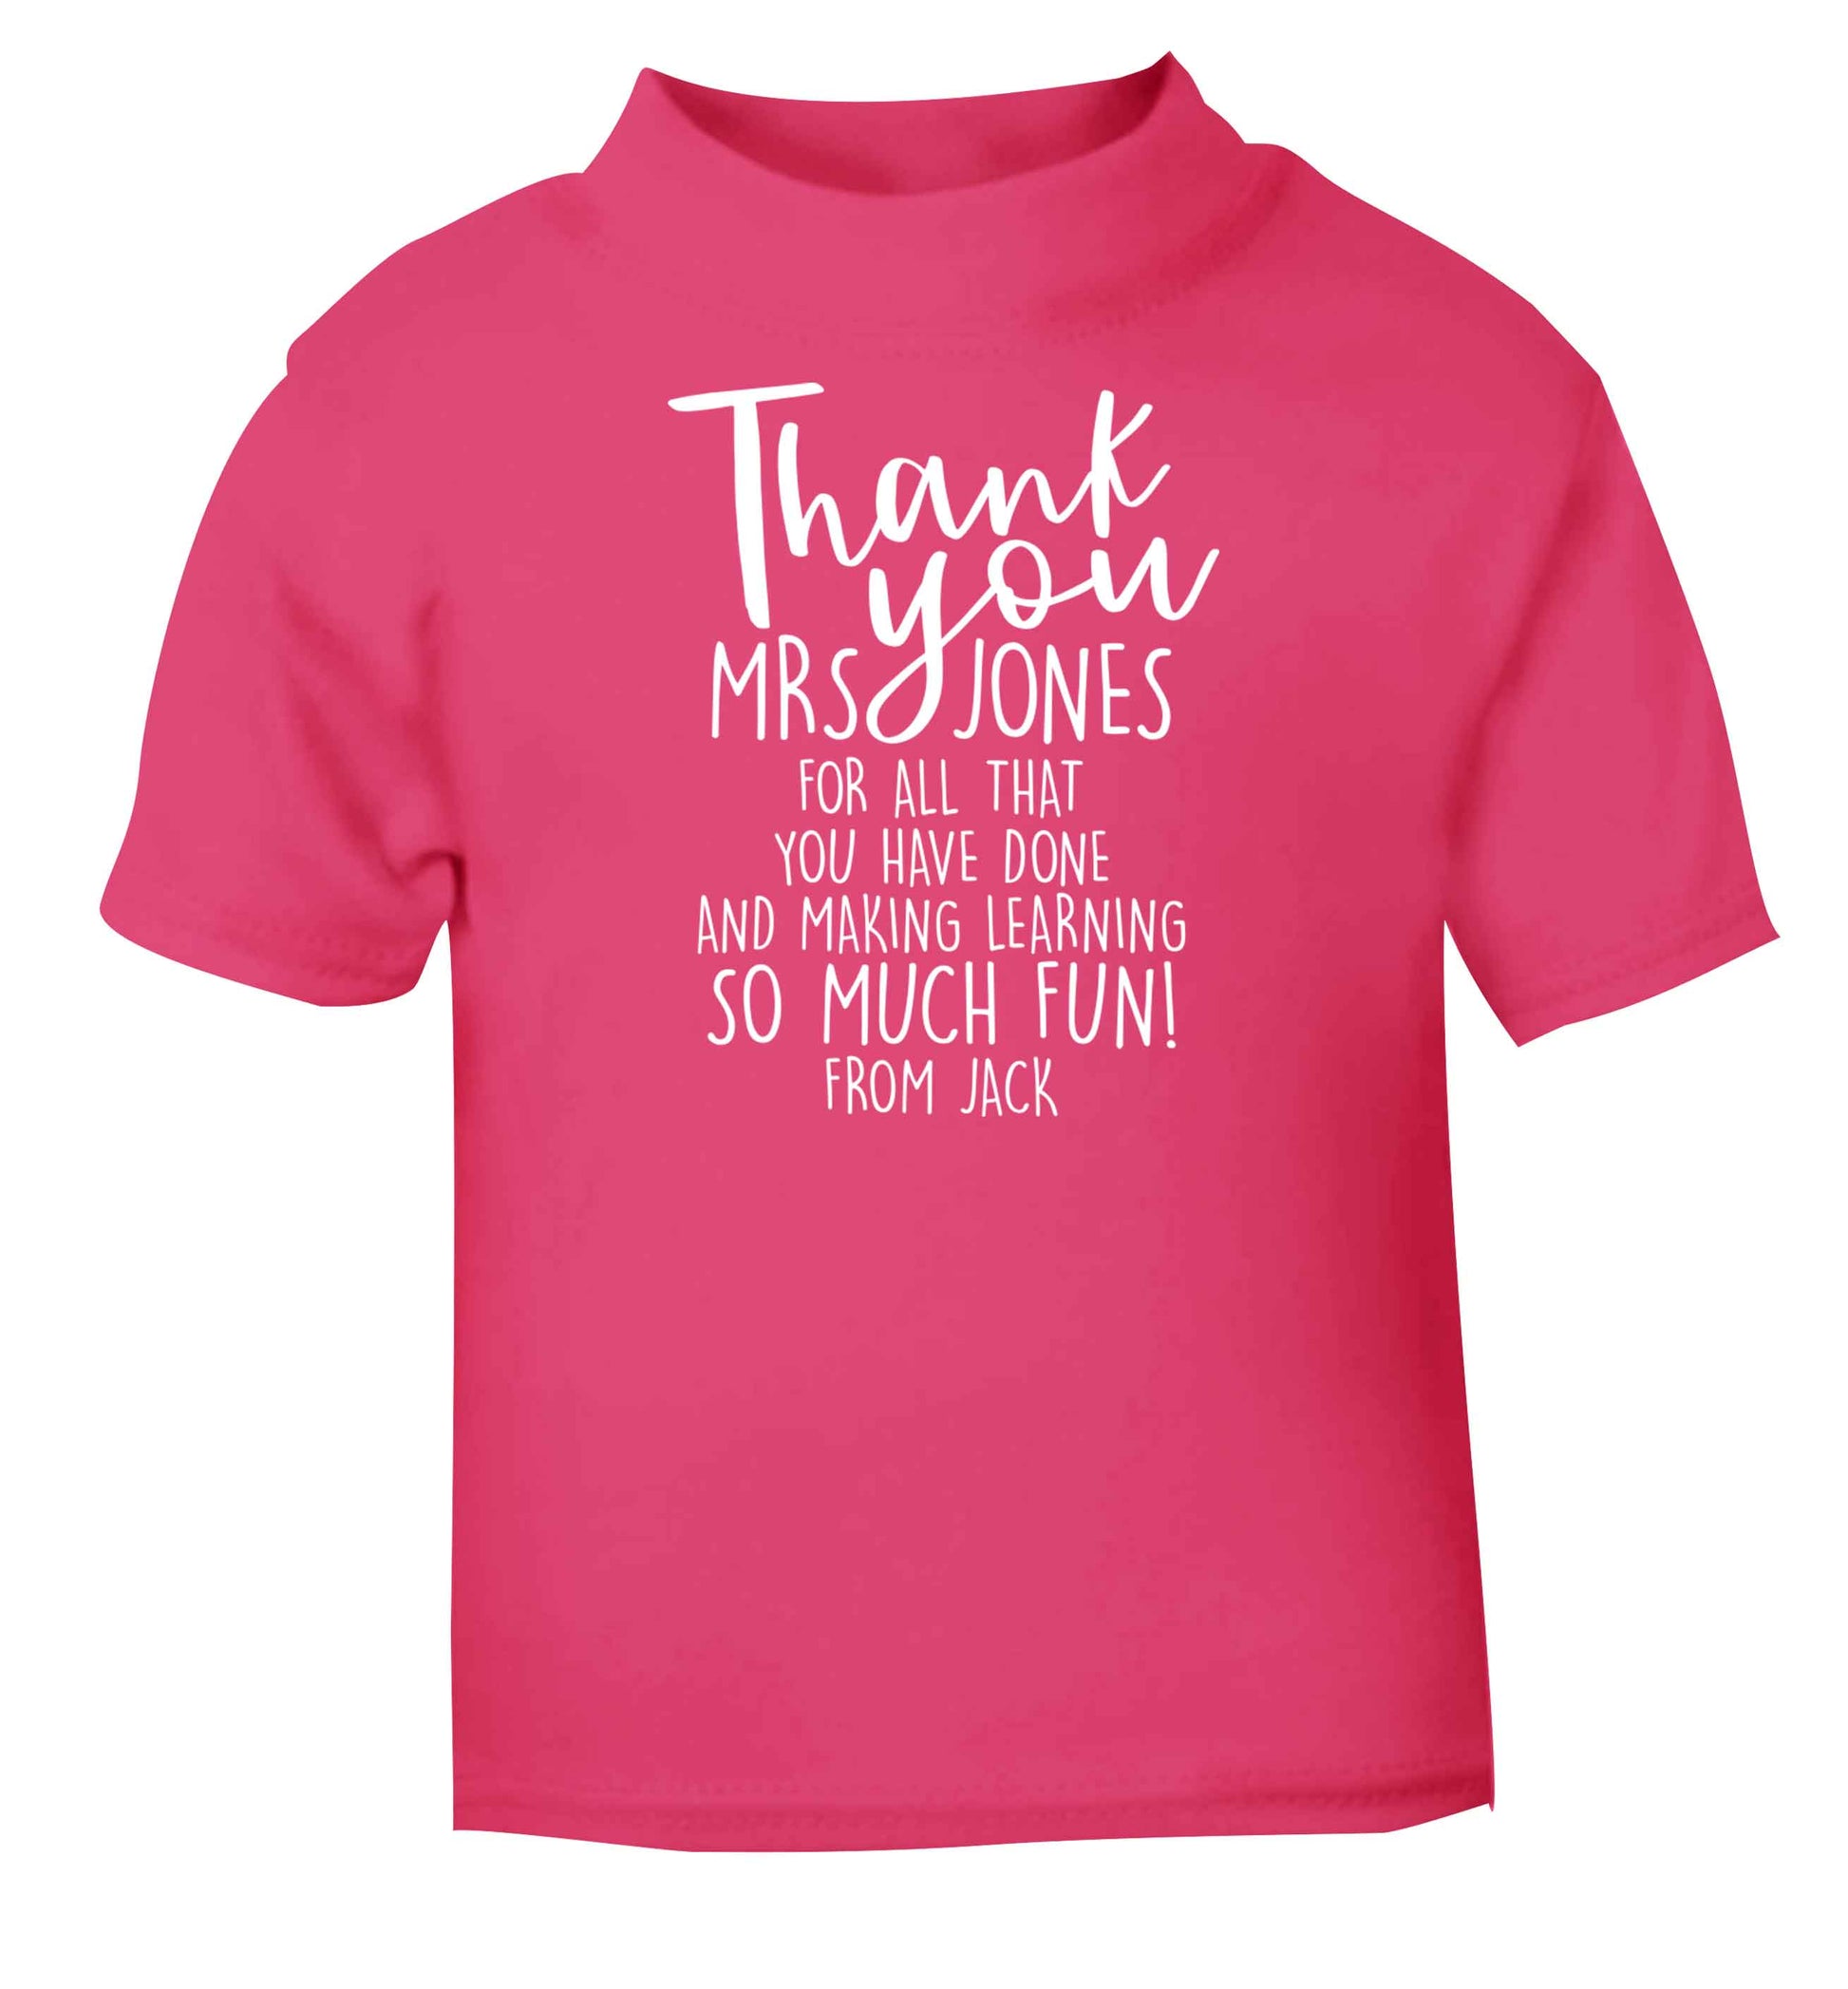 Personalised thank you teacher for all that you've done and making learning so much fun pink baby toddler Tshirt 2 Years